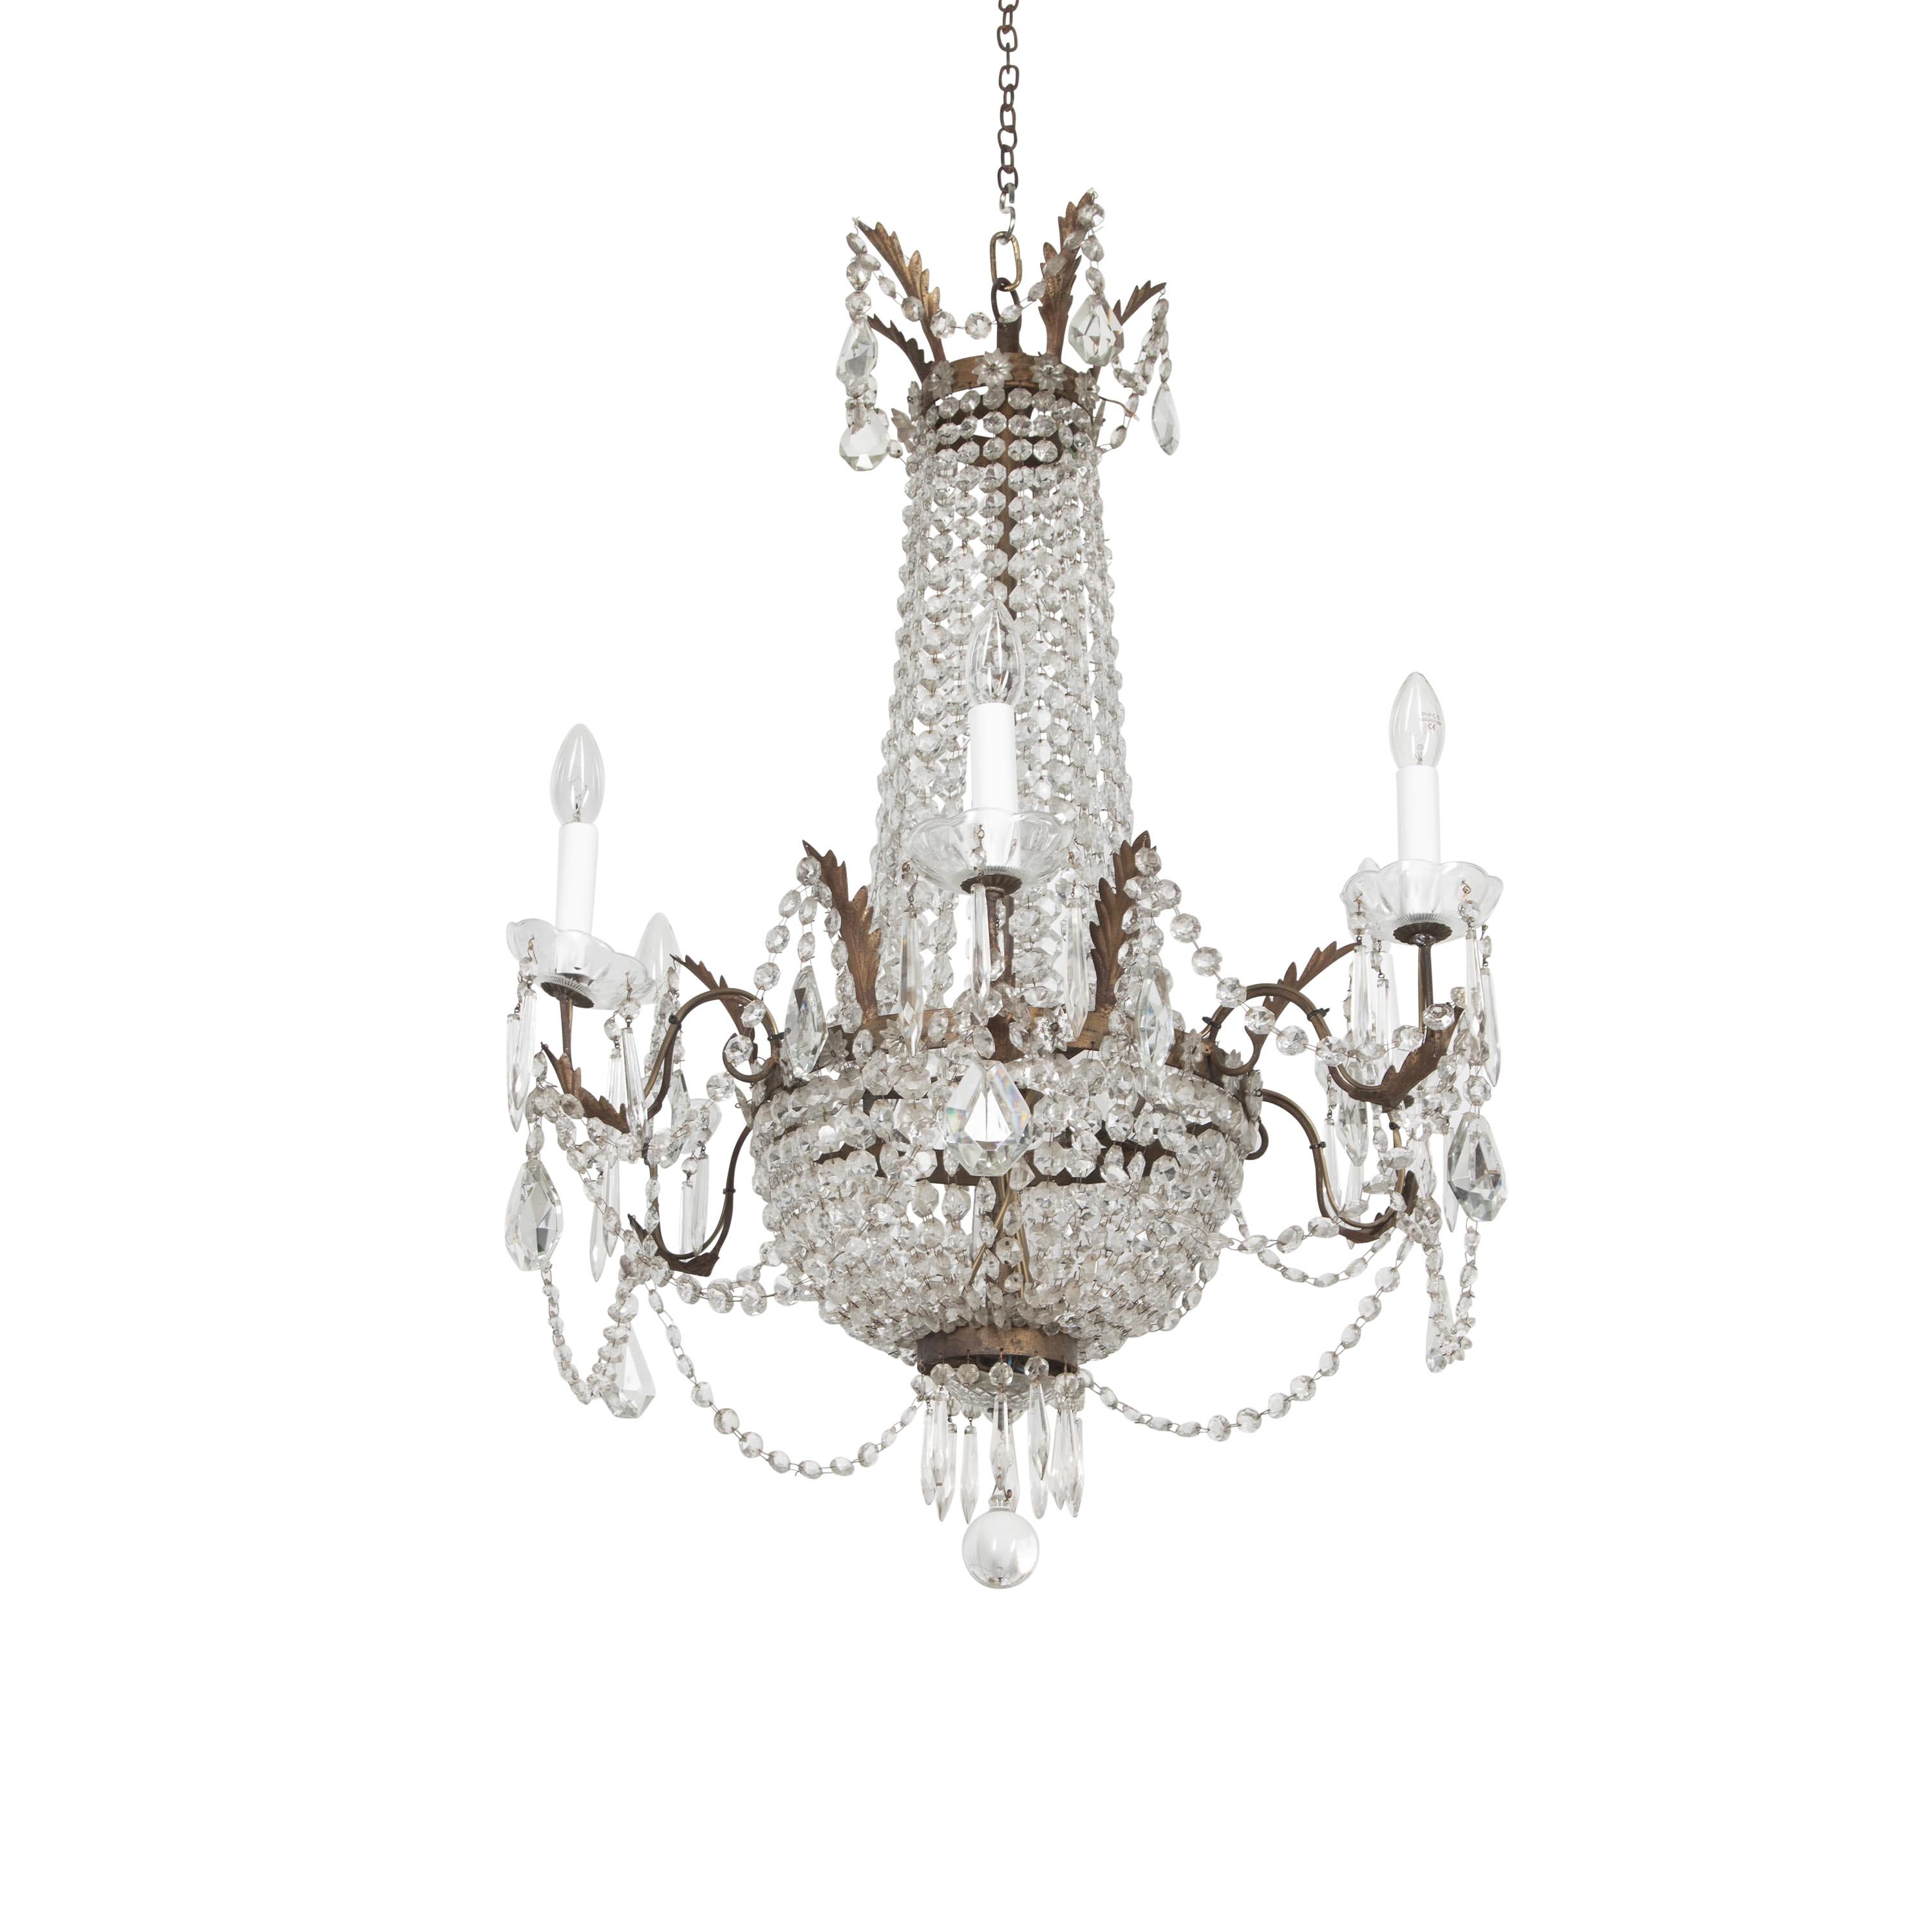 Decorative 19th Century chandelier made in France at the turn of the century.
With six arms and a gilt metal cage, this chandelier has been rewired and PAT tested to UK standards.